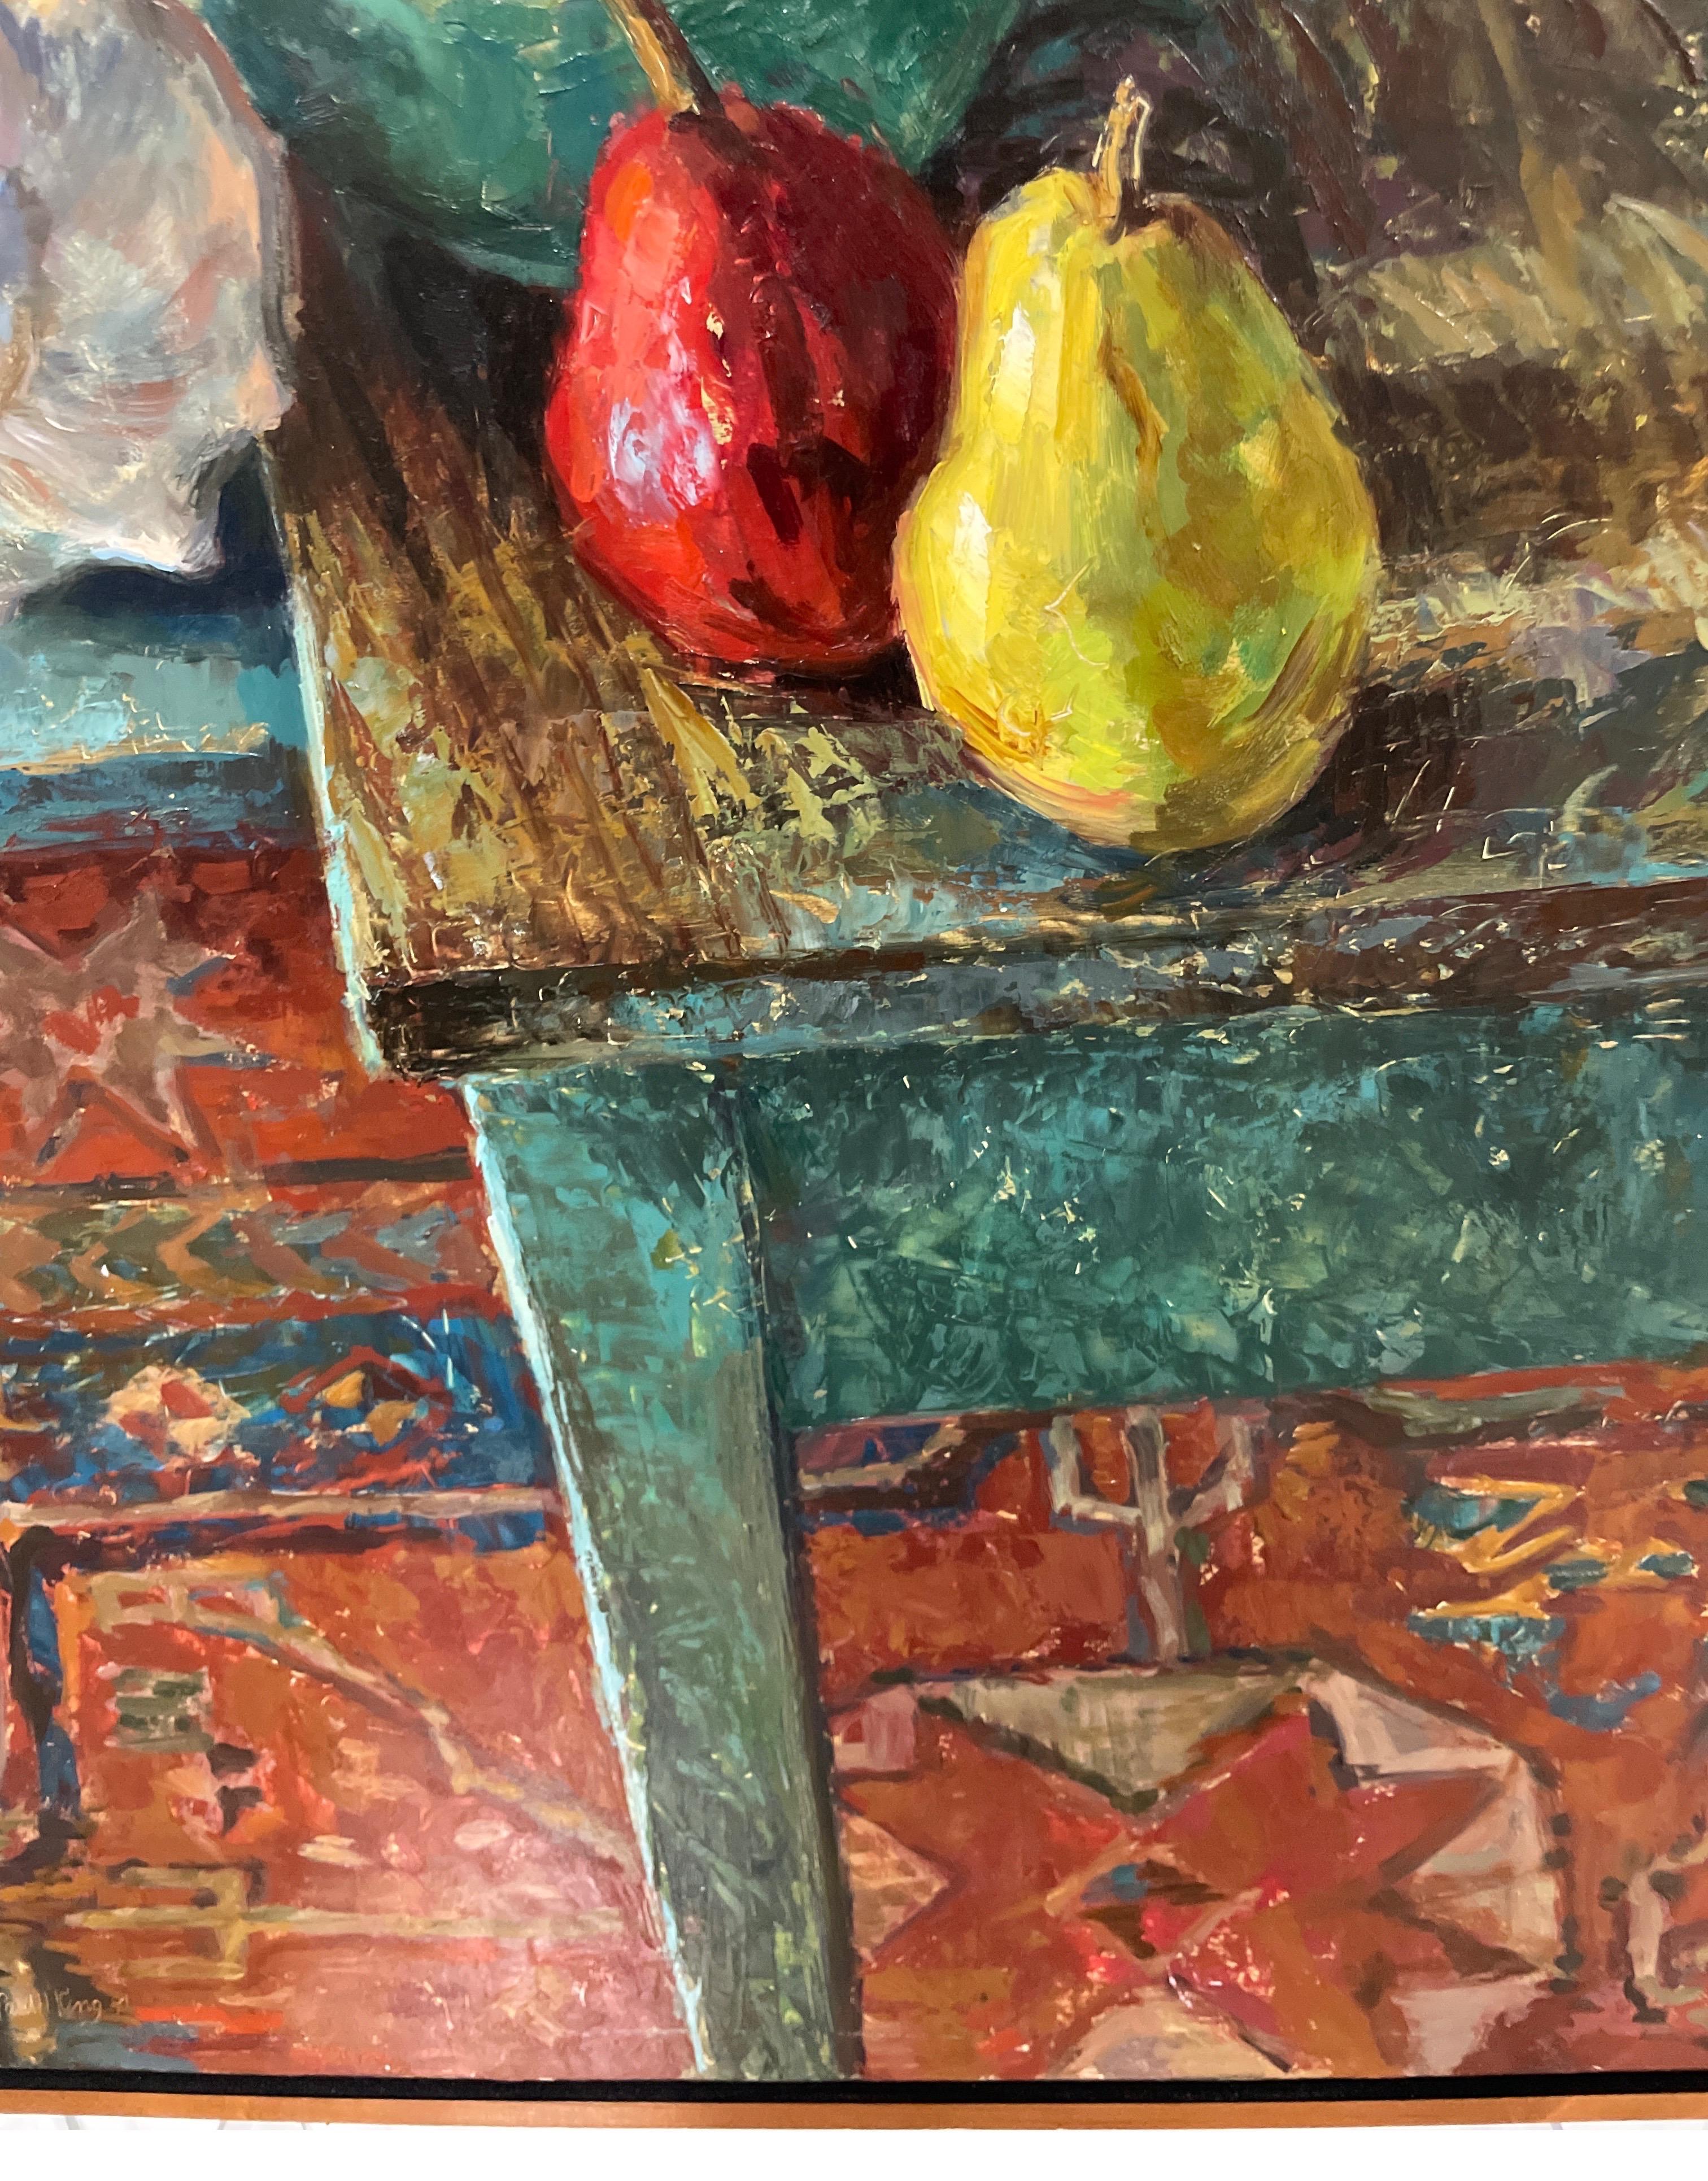 Wonderful contemporary still life painting by Paul King. The painting depicts fruit in a bowl & on country table with other pieces. The floor has an oriental rug. Very beautiful details.